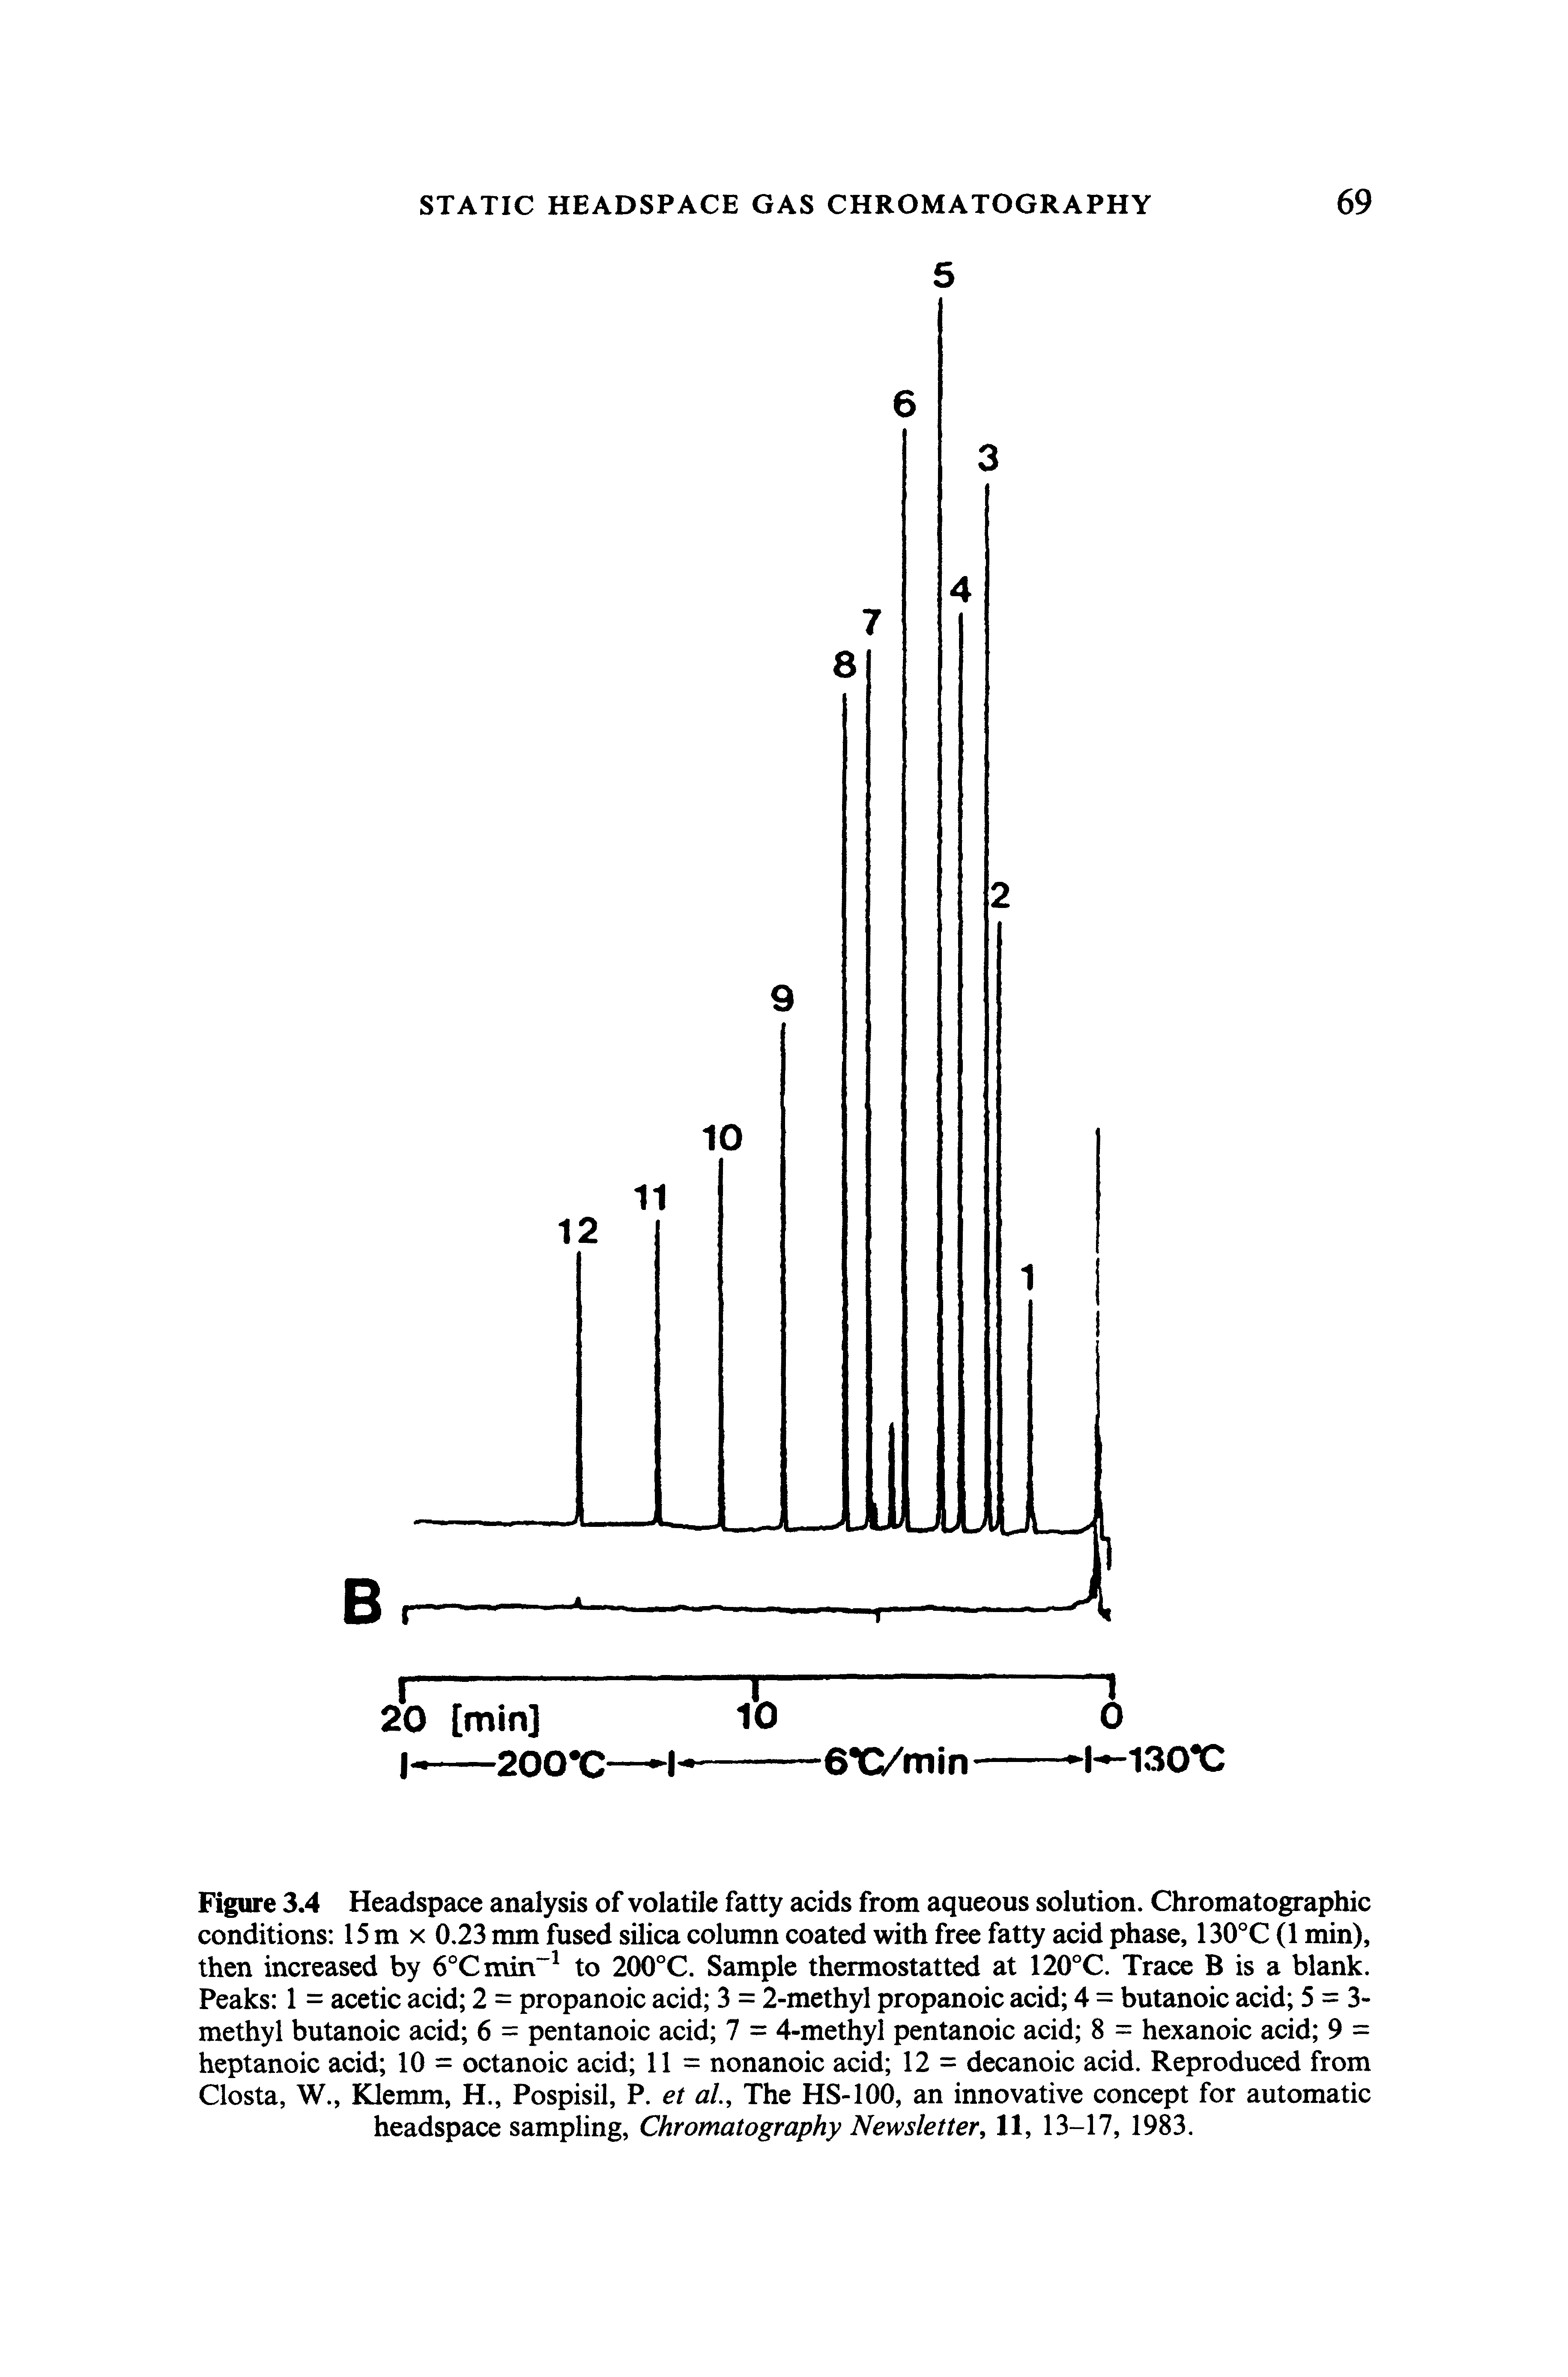 Figure 3.4 Headspace analysis of volatile fatty acids from aqueous solution. Chromatographic conditions 15 m x 0.23 mm fused silica column coated with free fatty acid phase, 130°C (1 min), then increased by 6°Cmin to 200°C. Sample thermostatted at 120°C. Trace B is a blank. Peaks 1 = acetic acid 2 = propanoic acid 3 = 2-methyl propanoic acid 4 = butanoic acid 5 = 3-methyl butanoic acid 6 = pentanoic acid 7 = 4-methyl pentanoic acid 8 = hexanoic acid 9 = heptanoic acid 10 = octanoic acid 11 = nonanoic acid 12 = decanoic acid. Reproduced from Closta, W., Klemm, H., Pospisil, P. et al.. The HS-lOO, an innovative concept for automatic headspace sampling, Chromatography Newsletter, 11, 13-17, 1983.